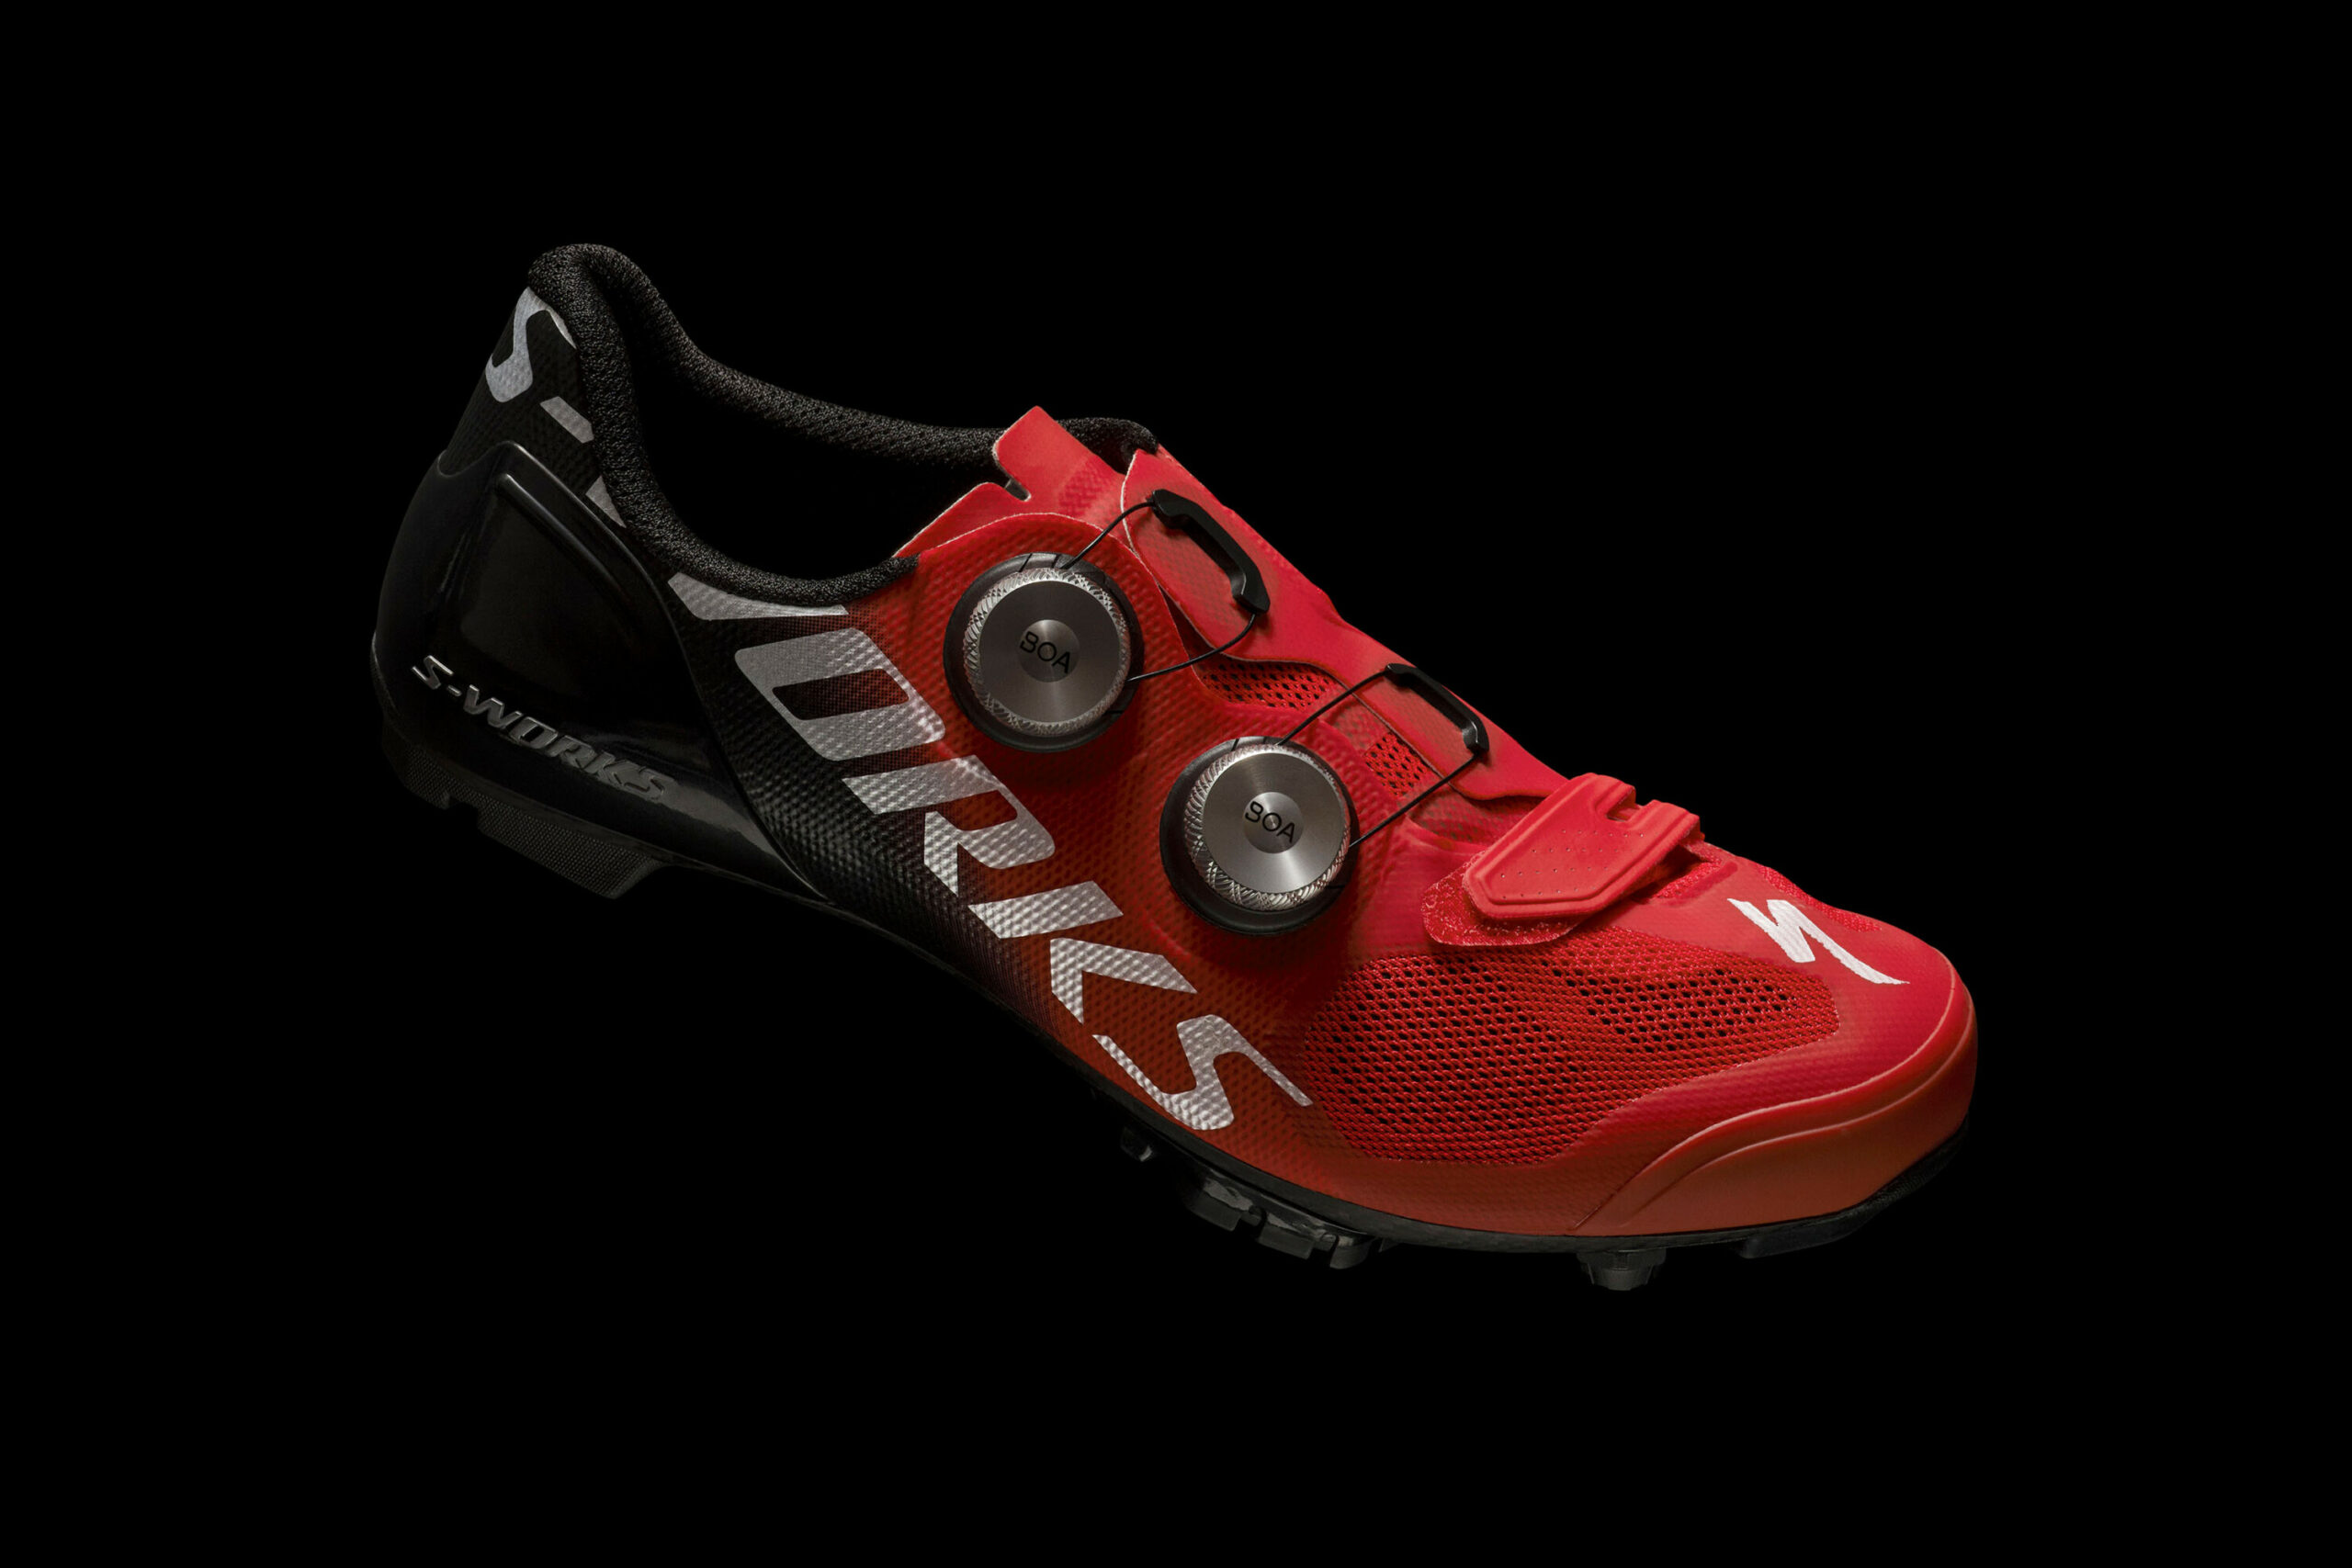 Specialized S-Works Vent Evo: Neuer Hightech Gravel-Schuh mit Carbonsohle